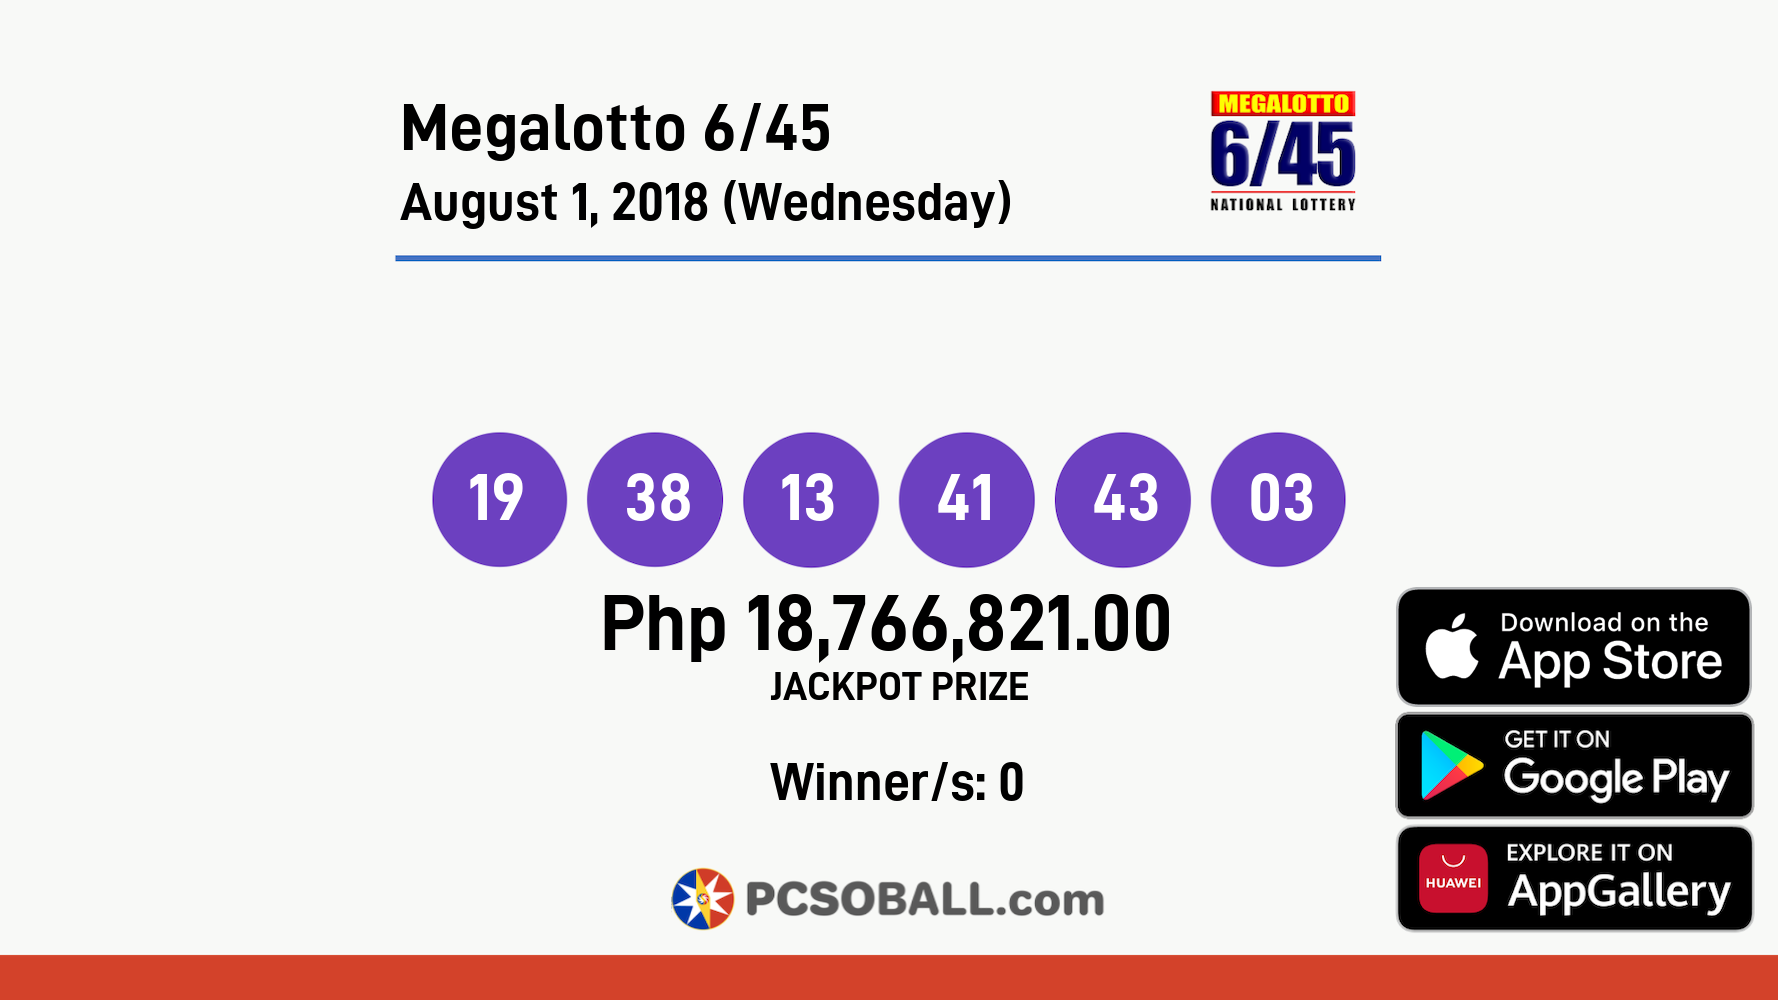 Megalotto 6/45 August 1, 2018 (Wednesday) Result